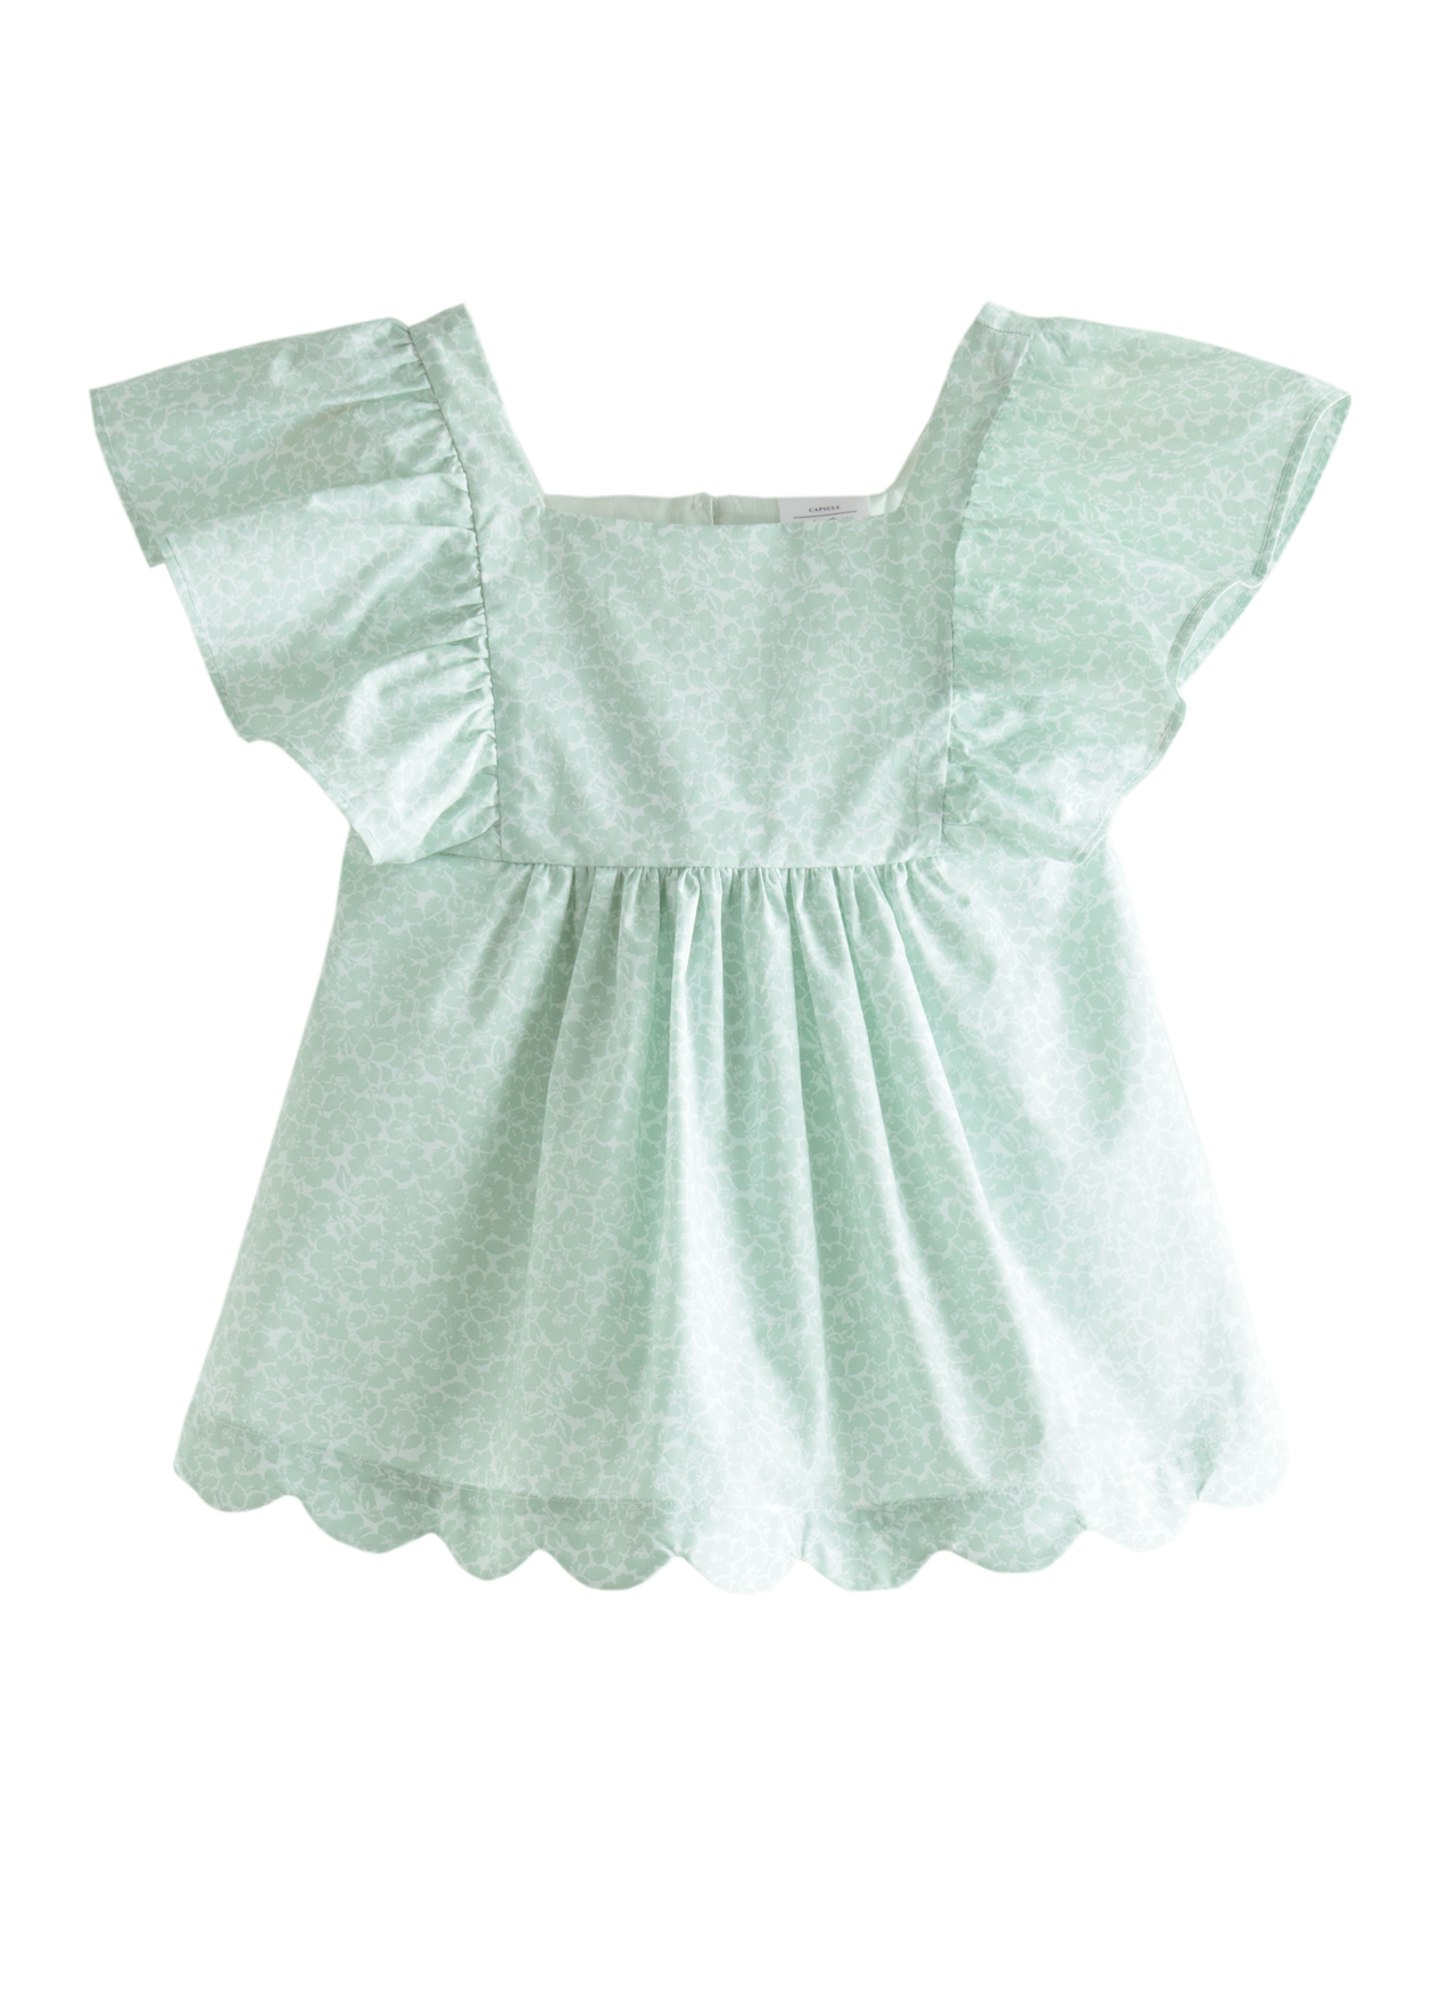 & Other Stories, Kids Ruffle-Neck Top, £35